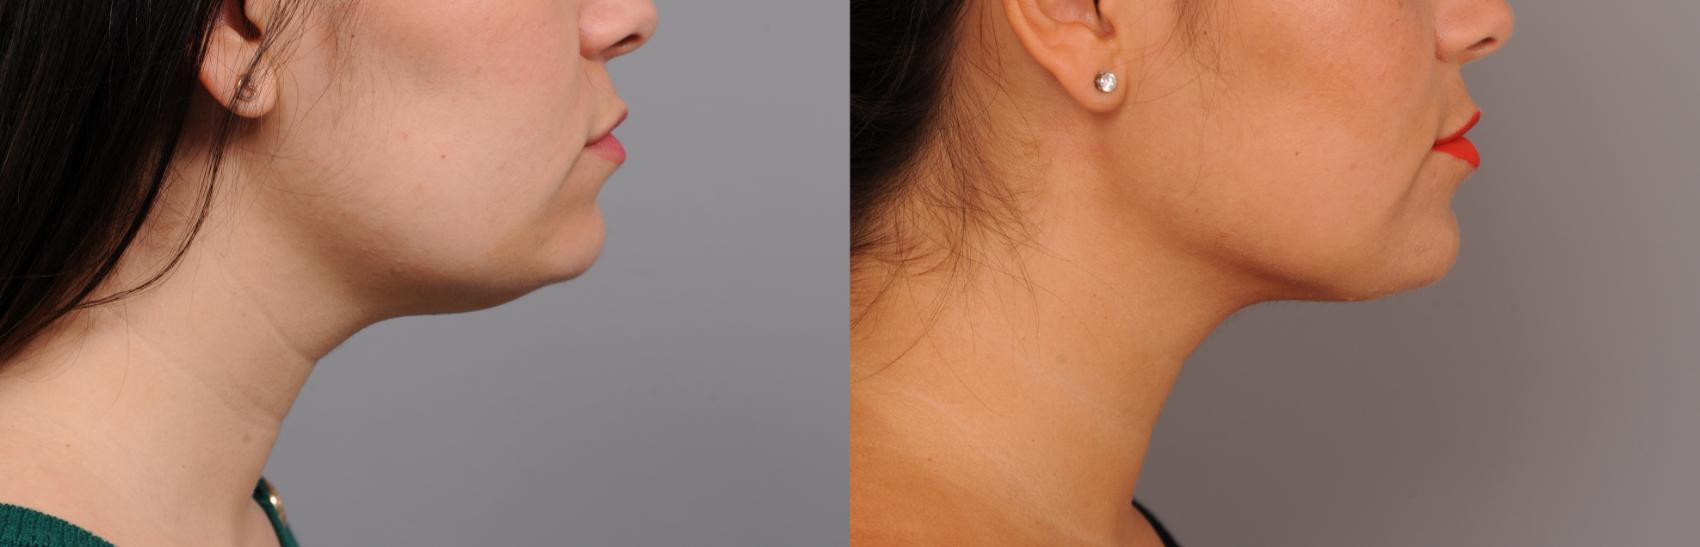 Neck Liposuction Chin Liposuction Before And After Pictures Case 257